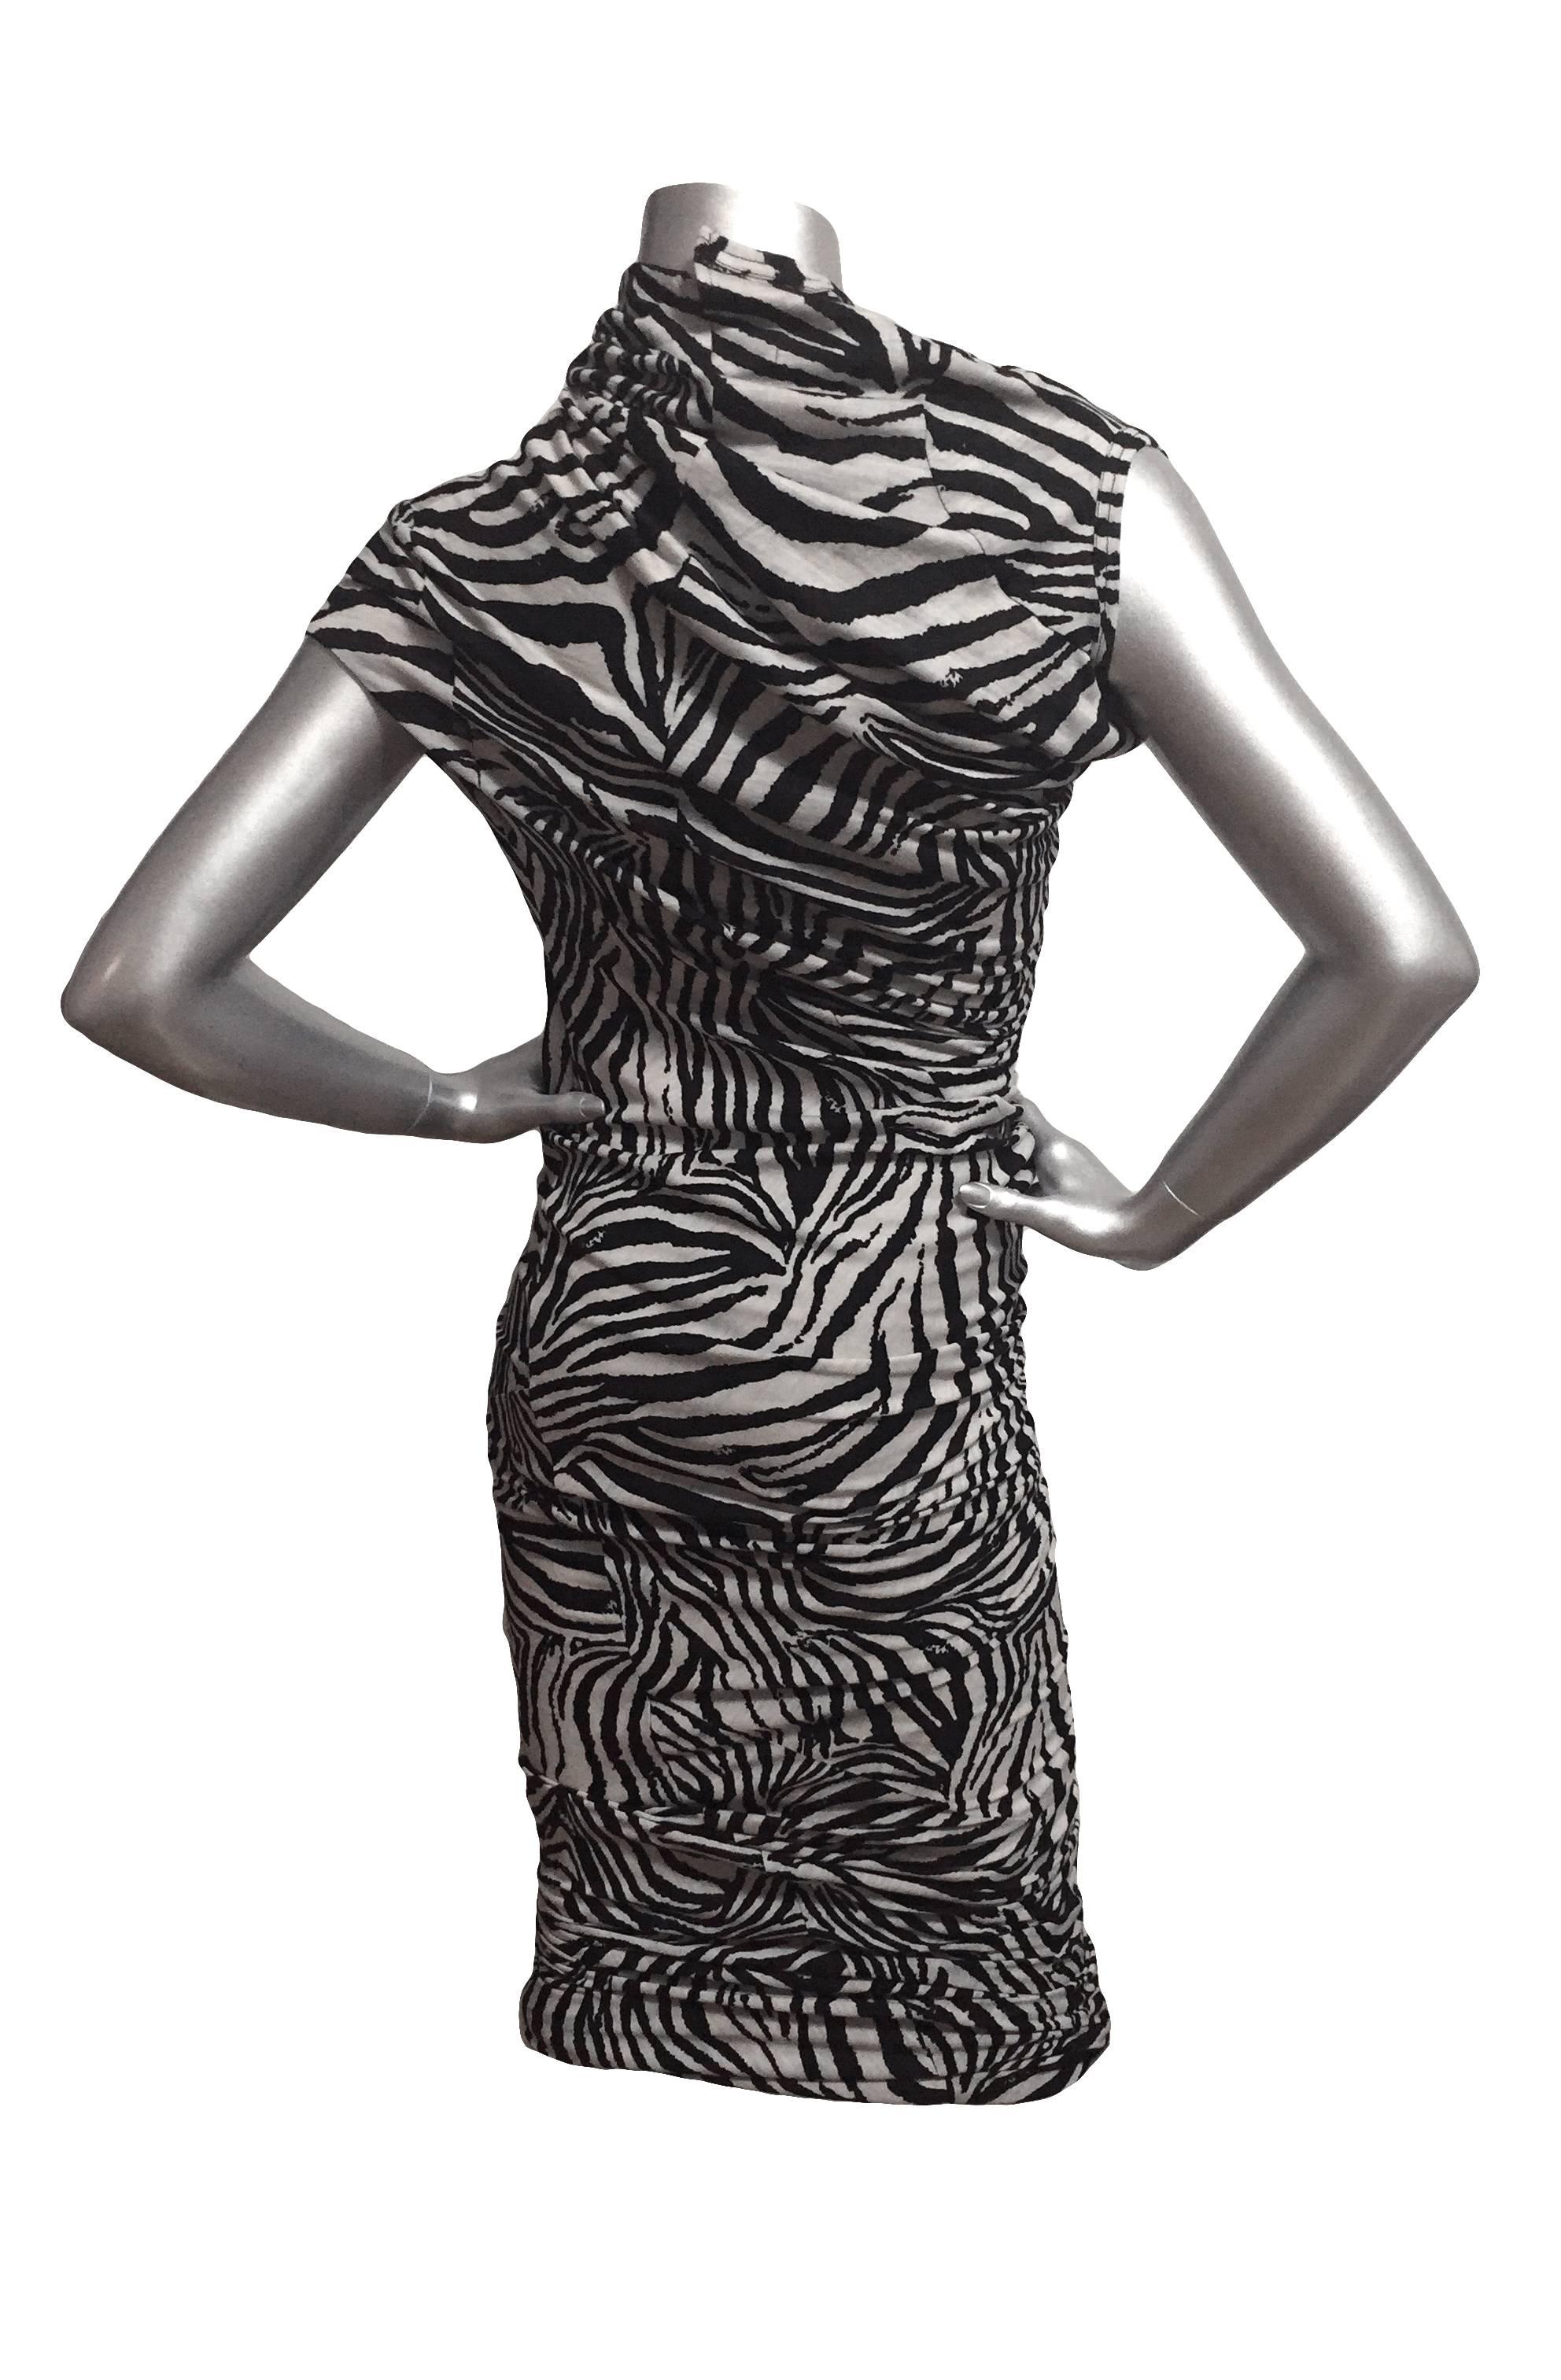 Junya Watanabe Zebra Print Dress, 2008 In Excellent Condition For Sale In Bethesda, MD